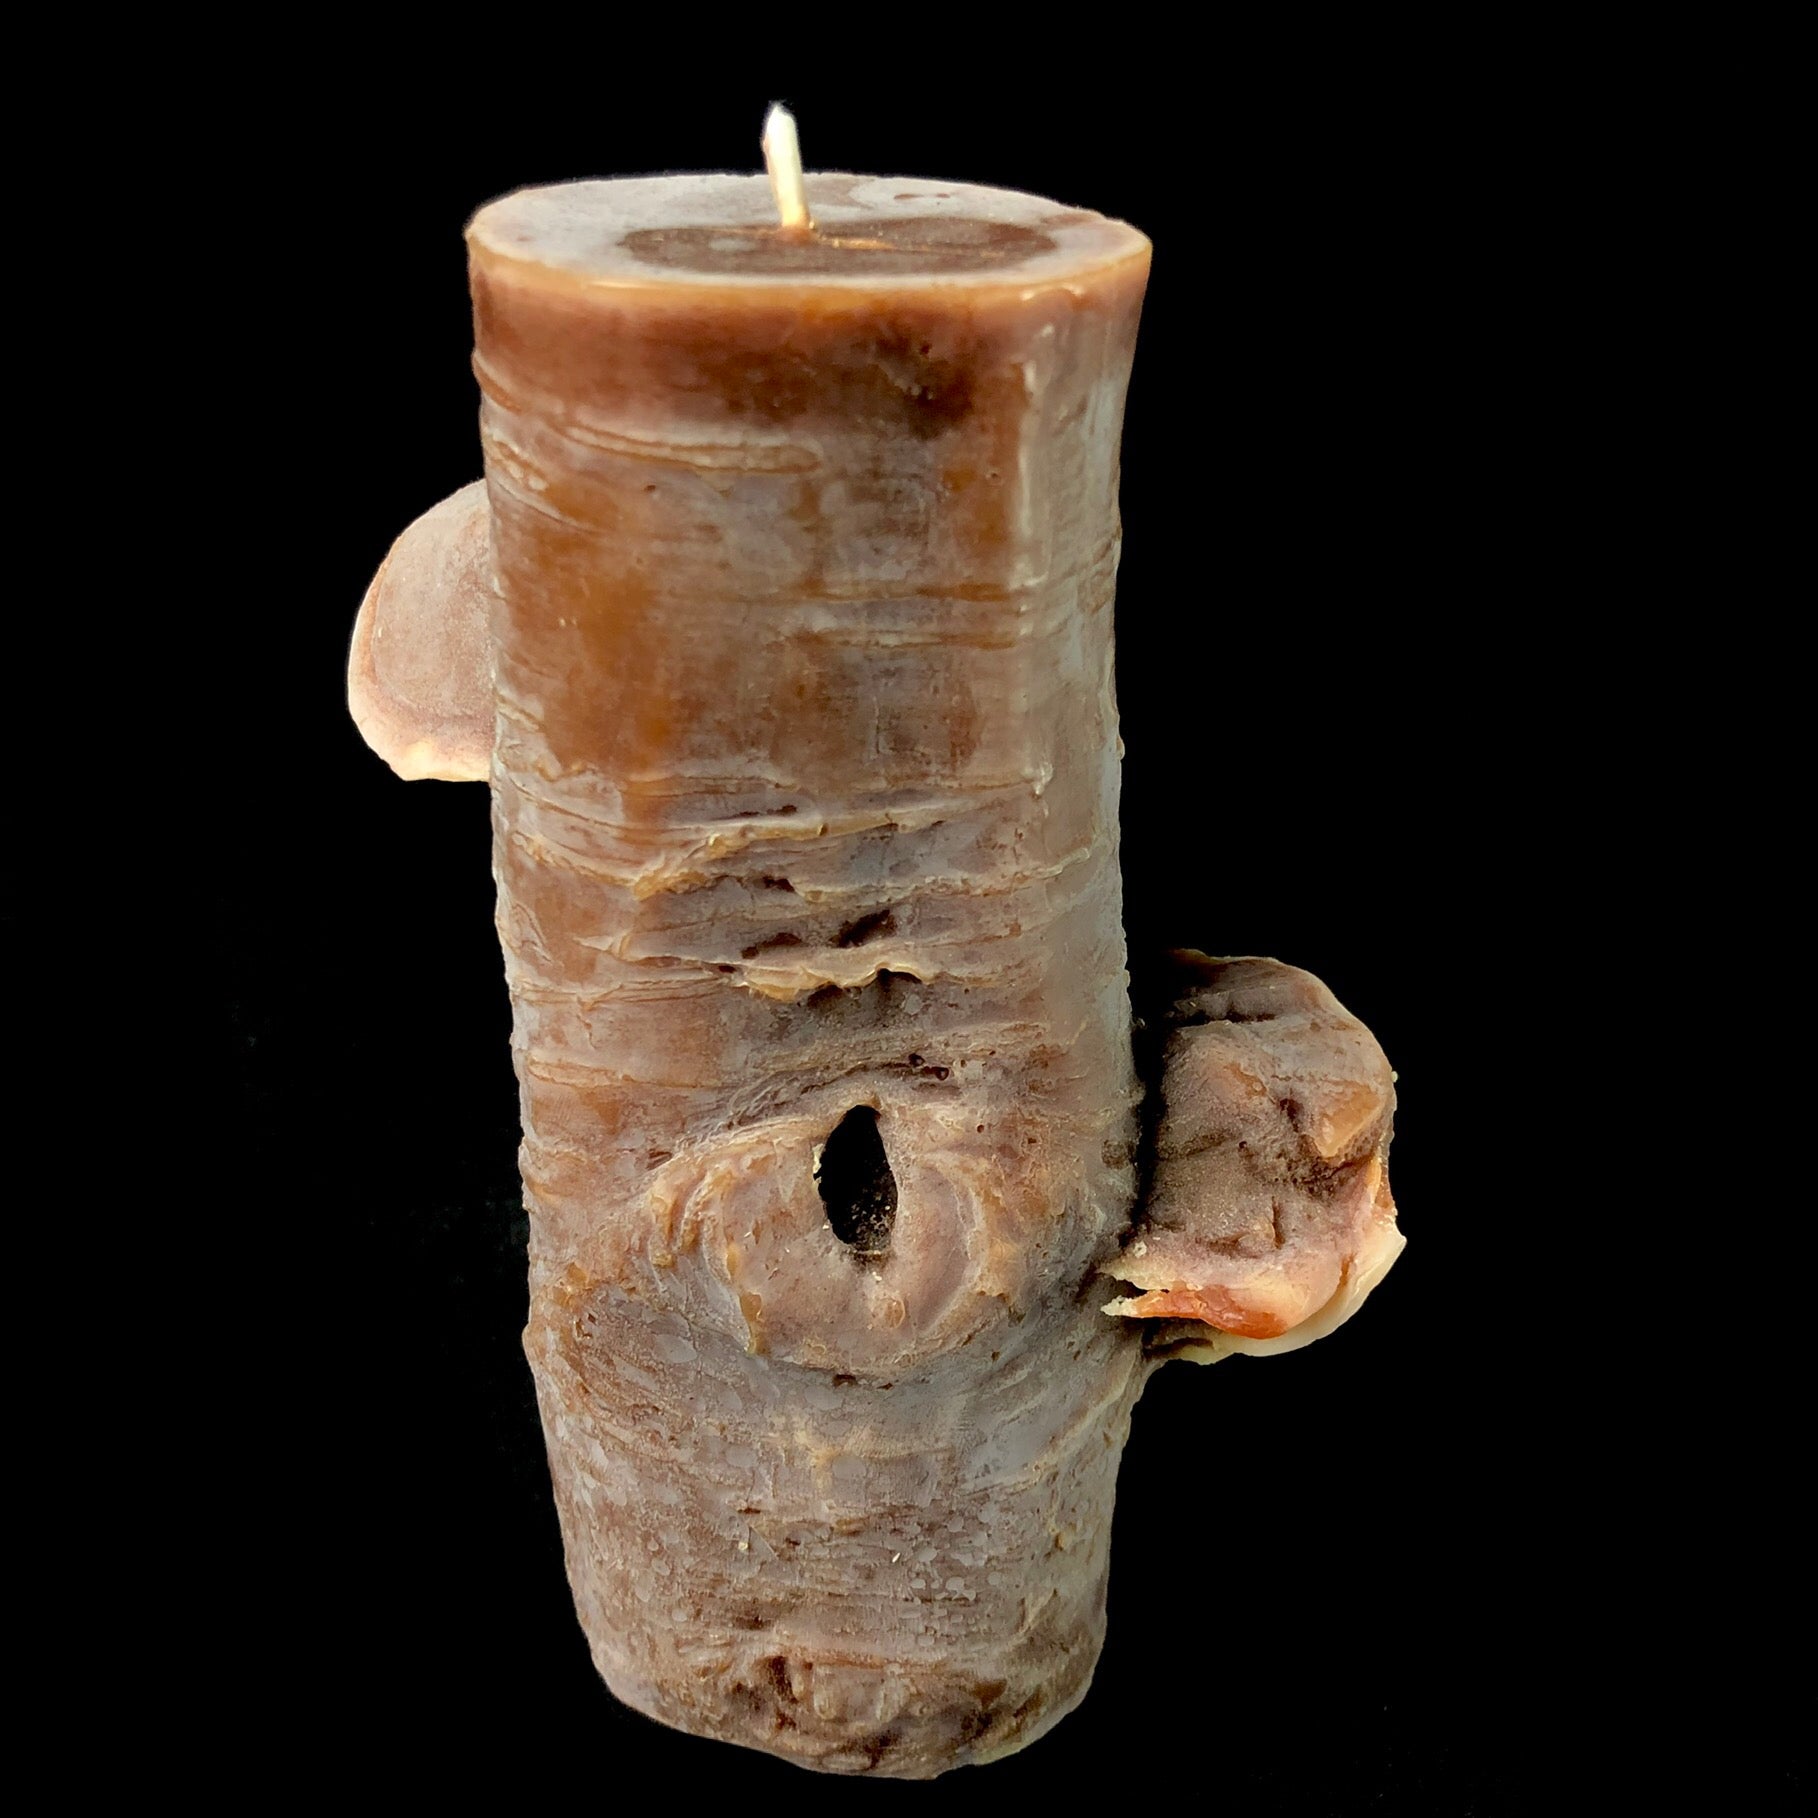 Light Brown Beeswax Stump Candle